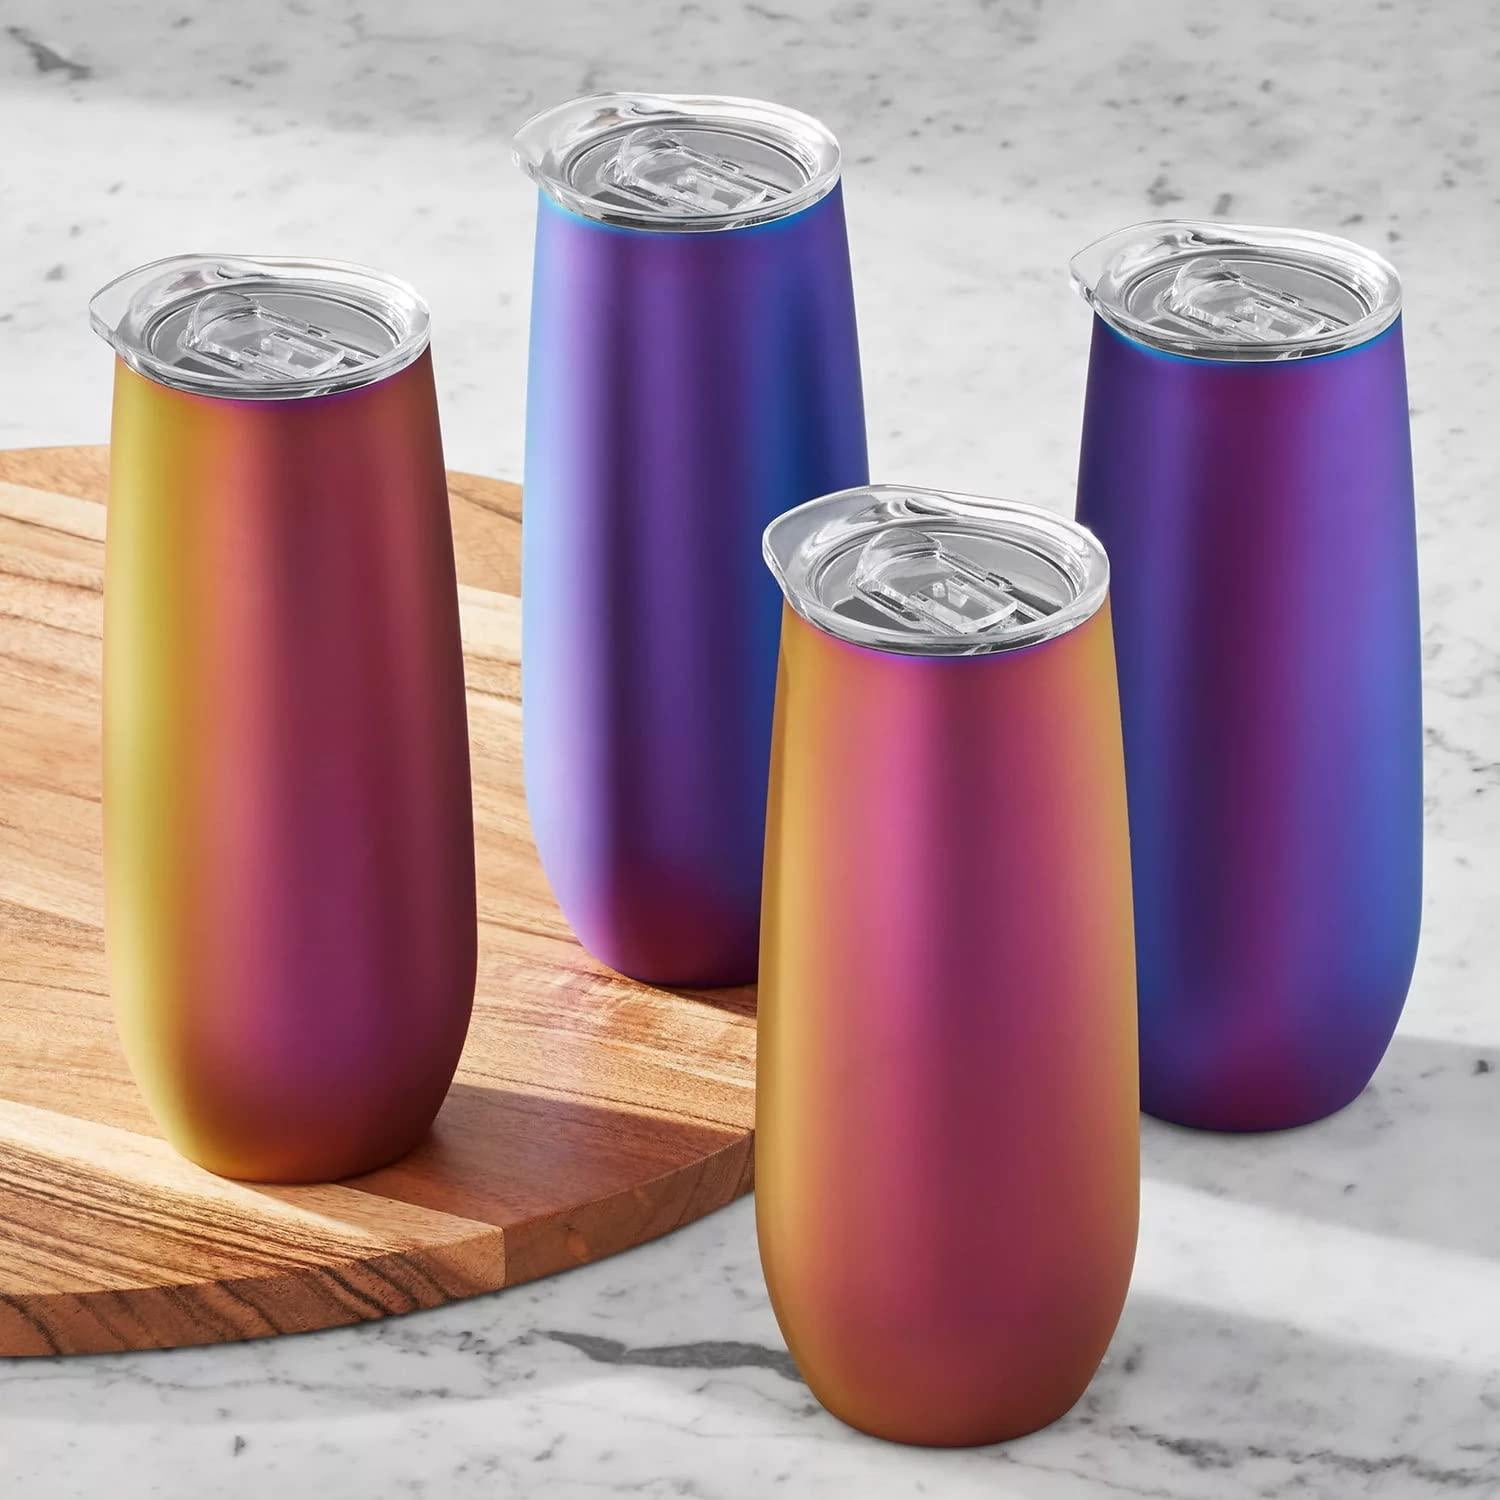 Member's Mark 14-oz. Stainless Steel Insulated Tumblers with Lids